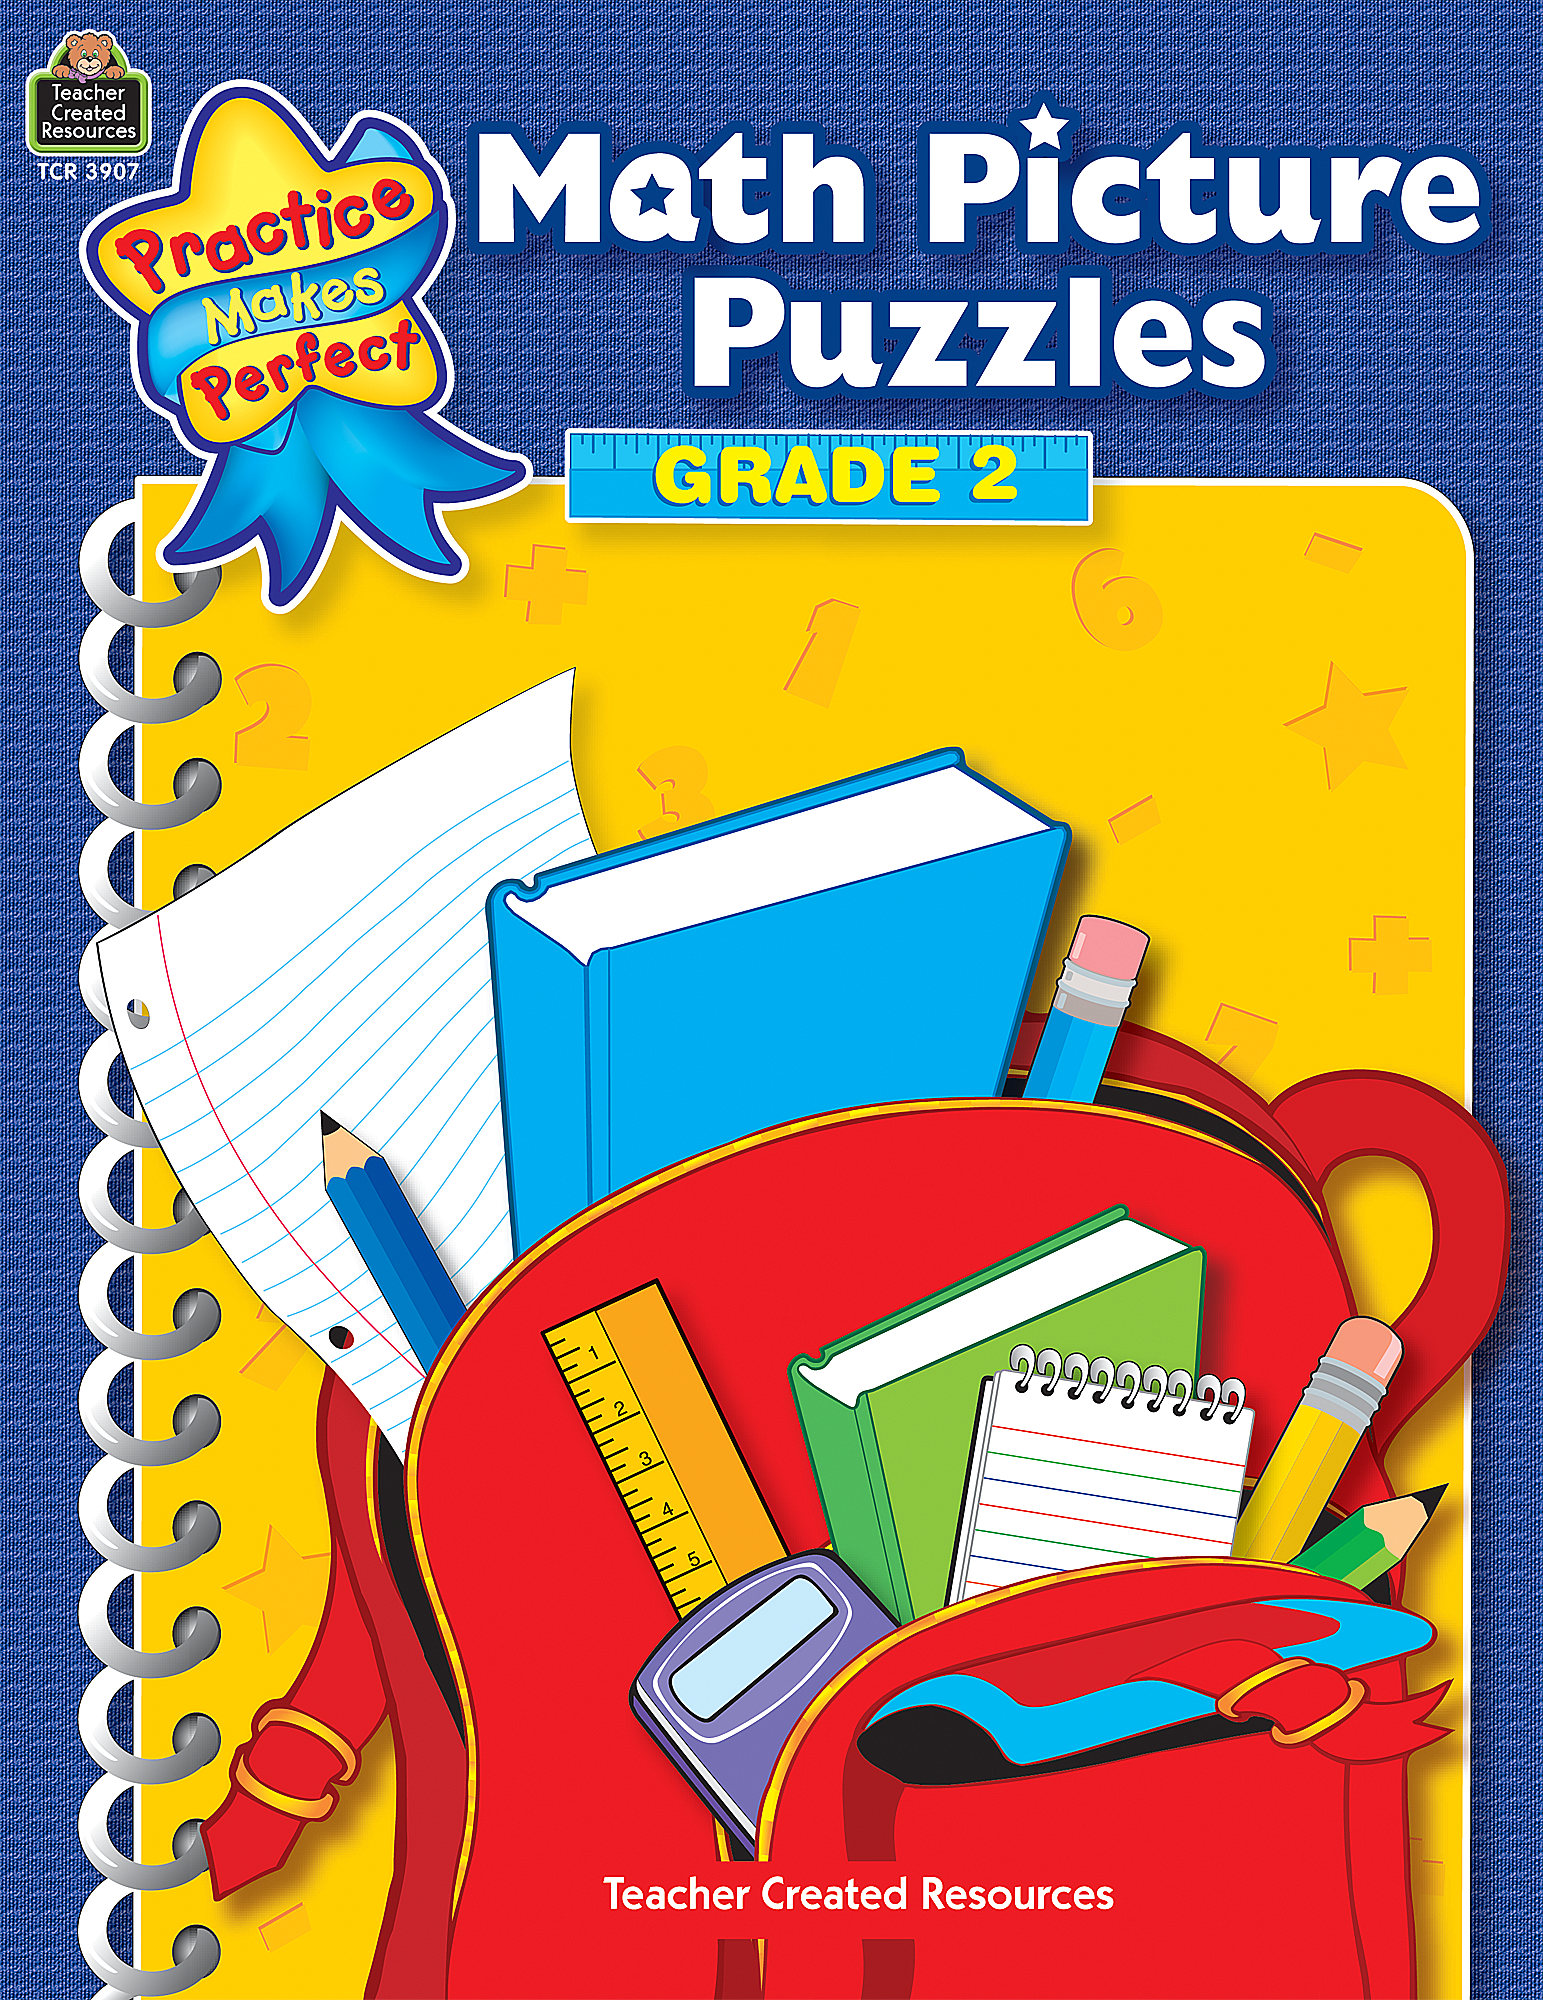 Math Picture Puzzles Grade 2 - TCR3907 | Teacher Created Resources